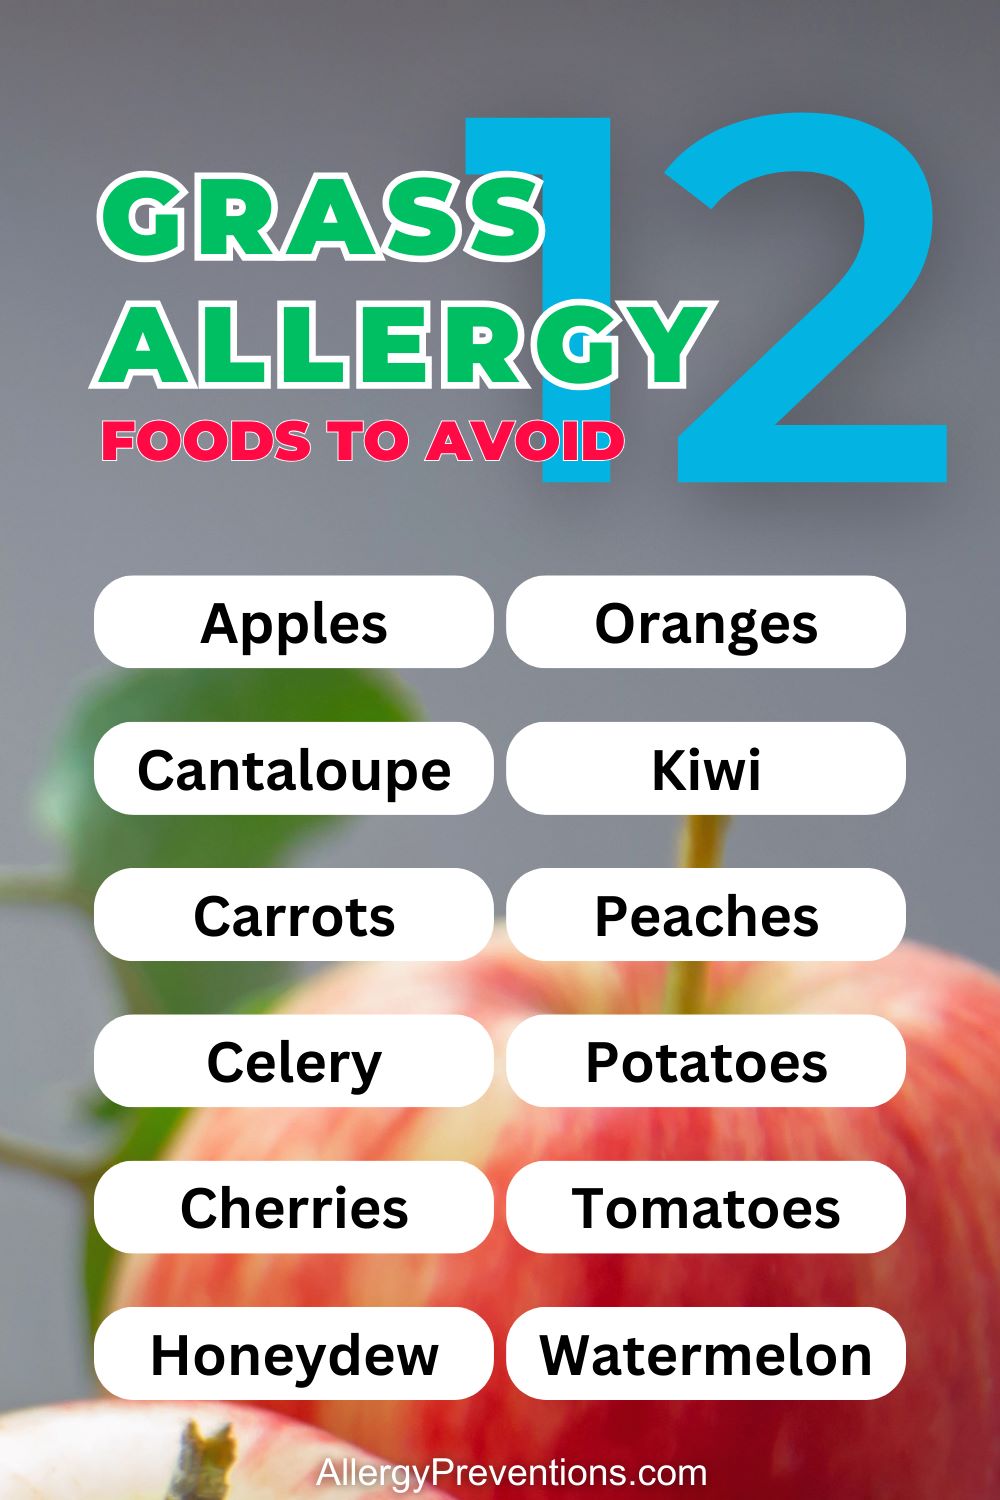 Grass allergy foods to avoid infographic. Here are 12 foods that may need to be avoided if you suffer from grass allergies: Apples, Cantaloupe, Carrots, Celery, Cherries, Honeydew, Oranges, Kiwi, Peaches, Potatoes, Tomatoes, and Watermelon.